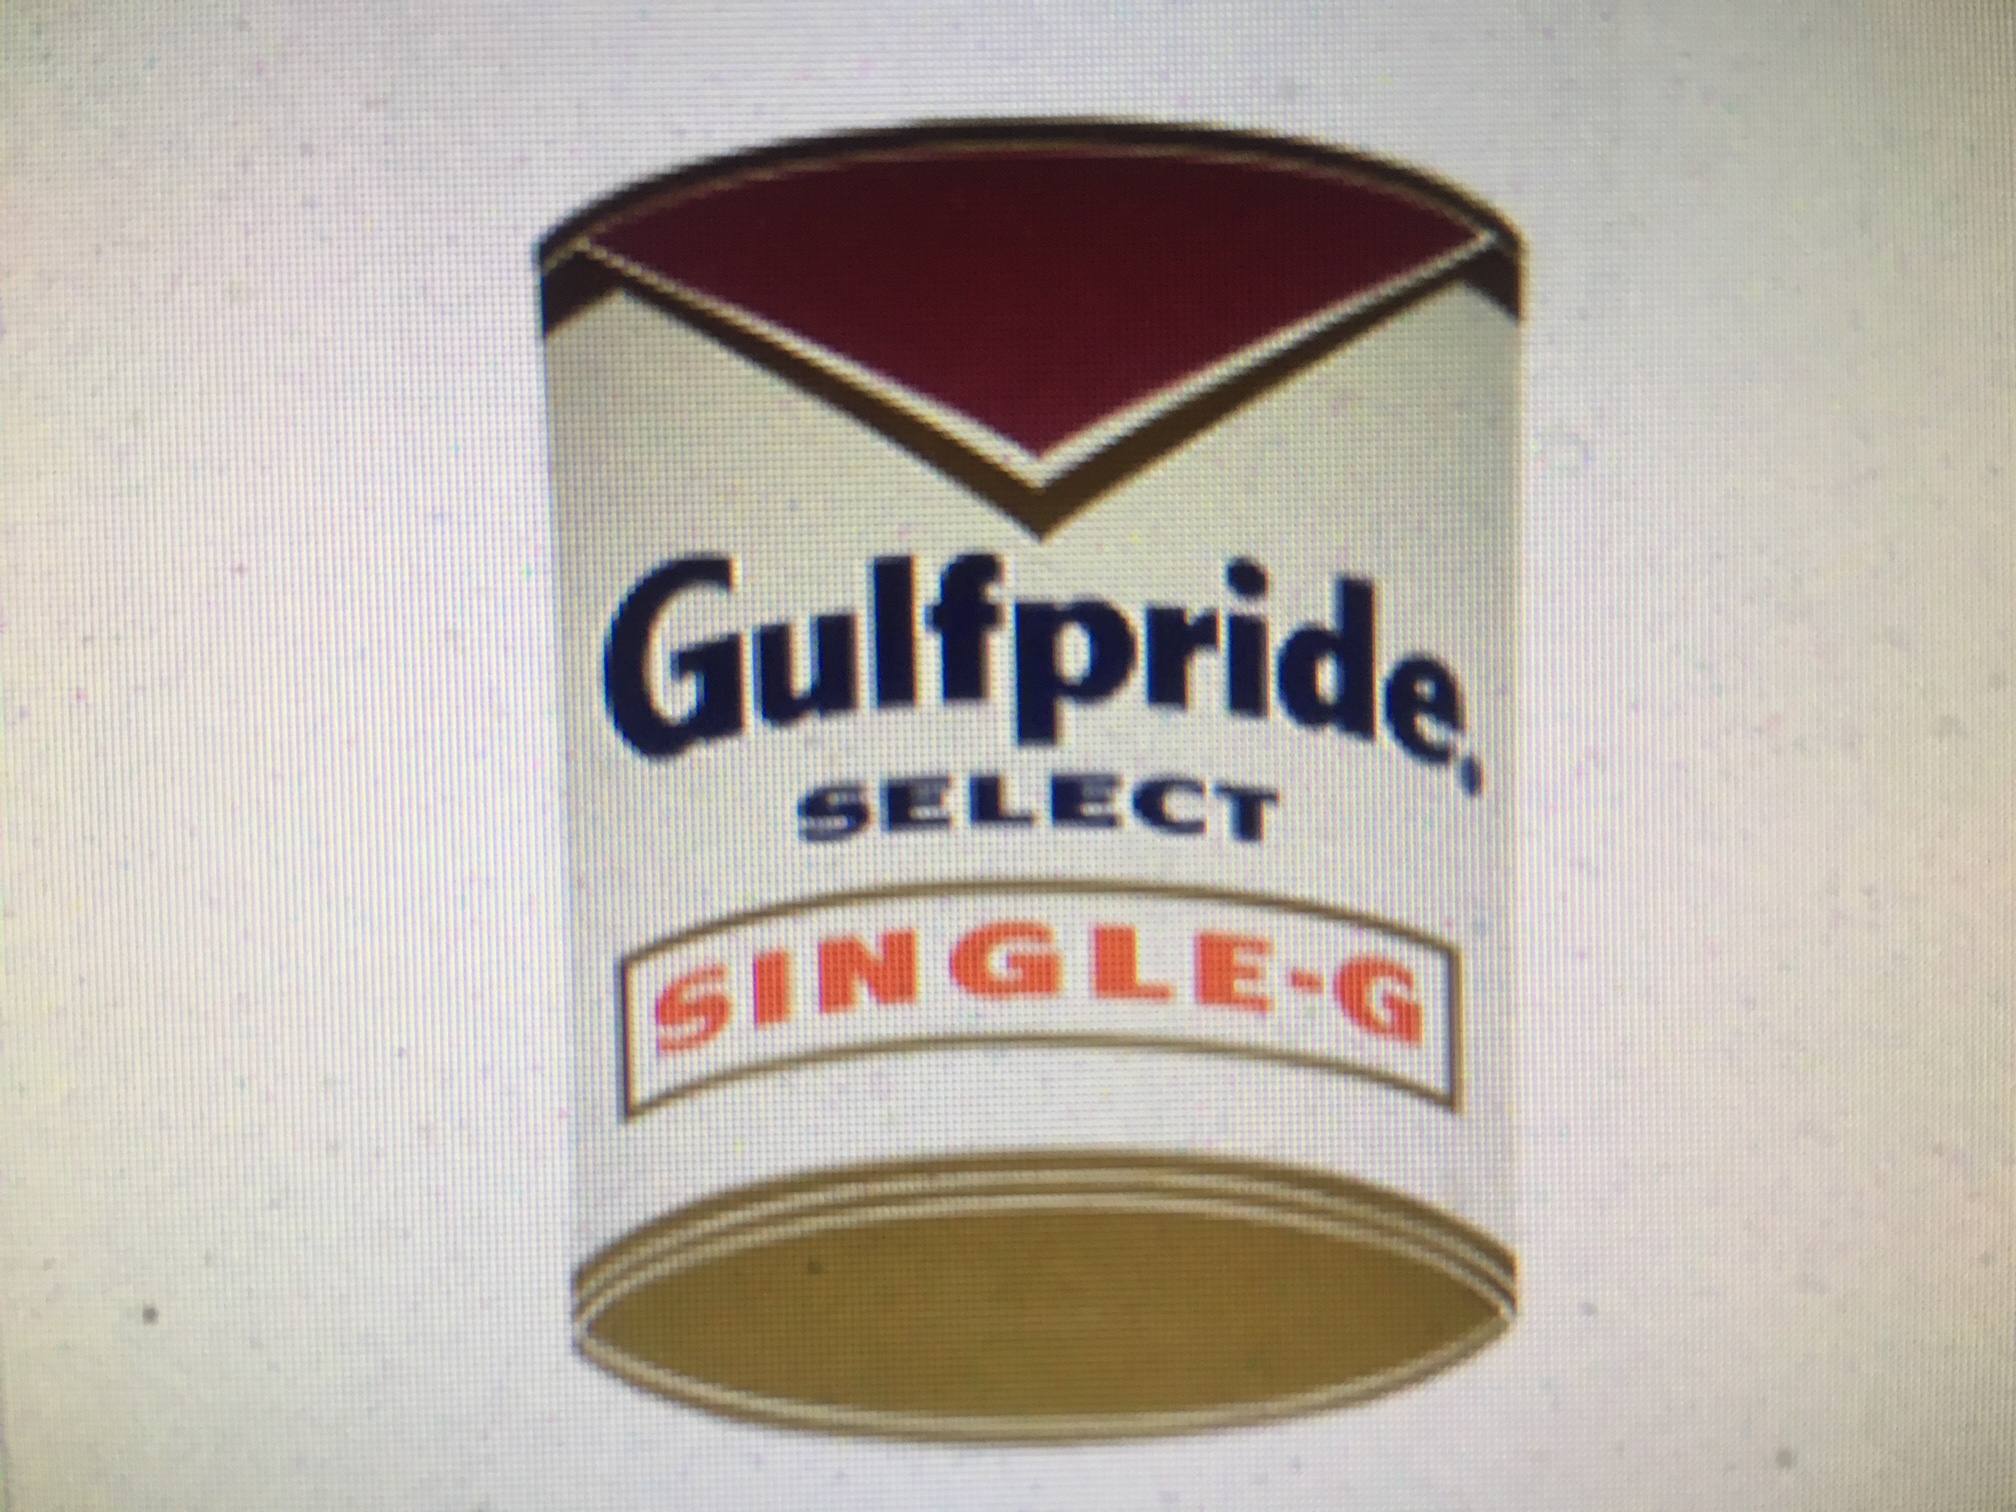 Gulfpride Select Flange Sign in Shape of Can